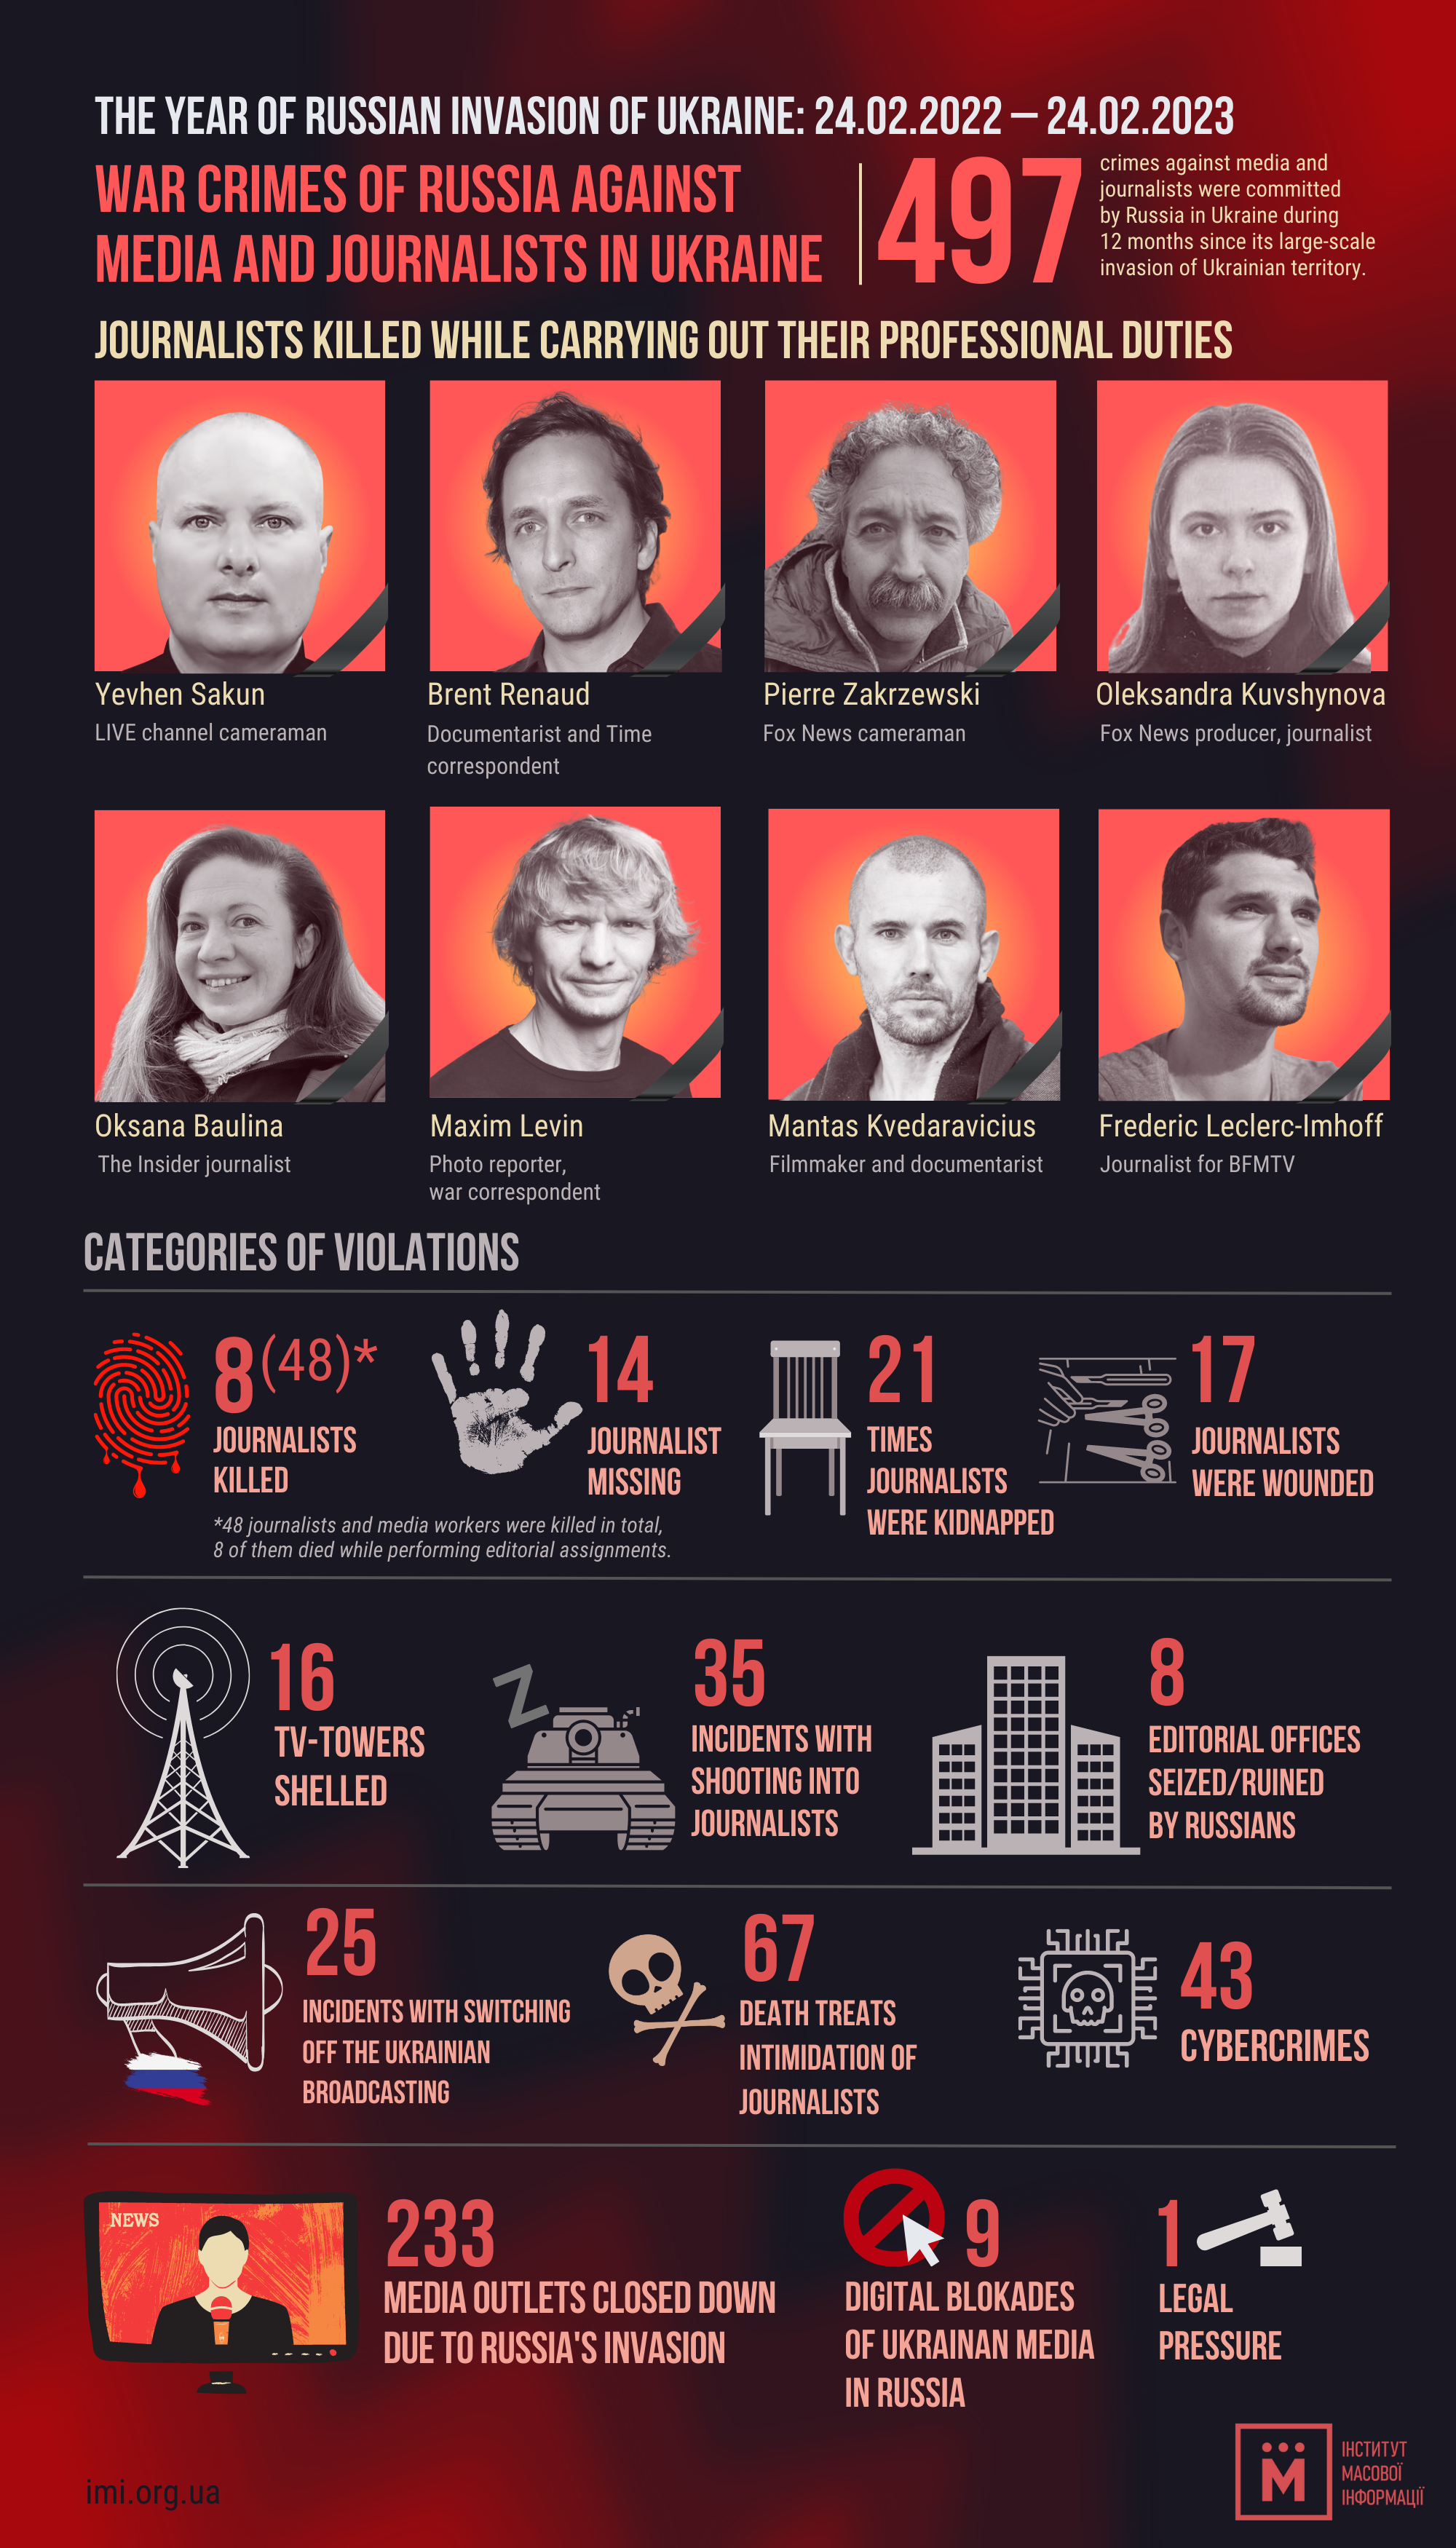 A year of the big war 497 crimes against journalists and media committed by Russia in Ukraine Institute of Mass Information image